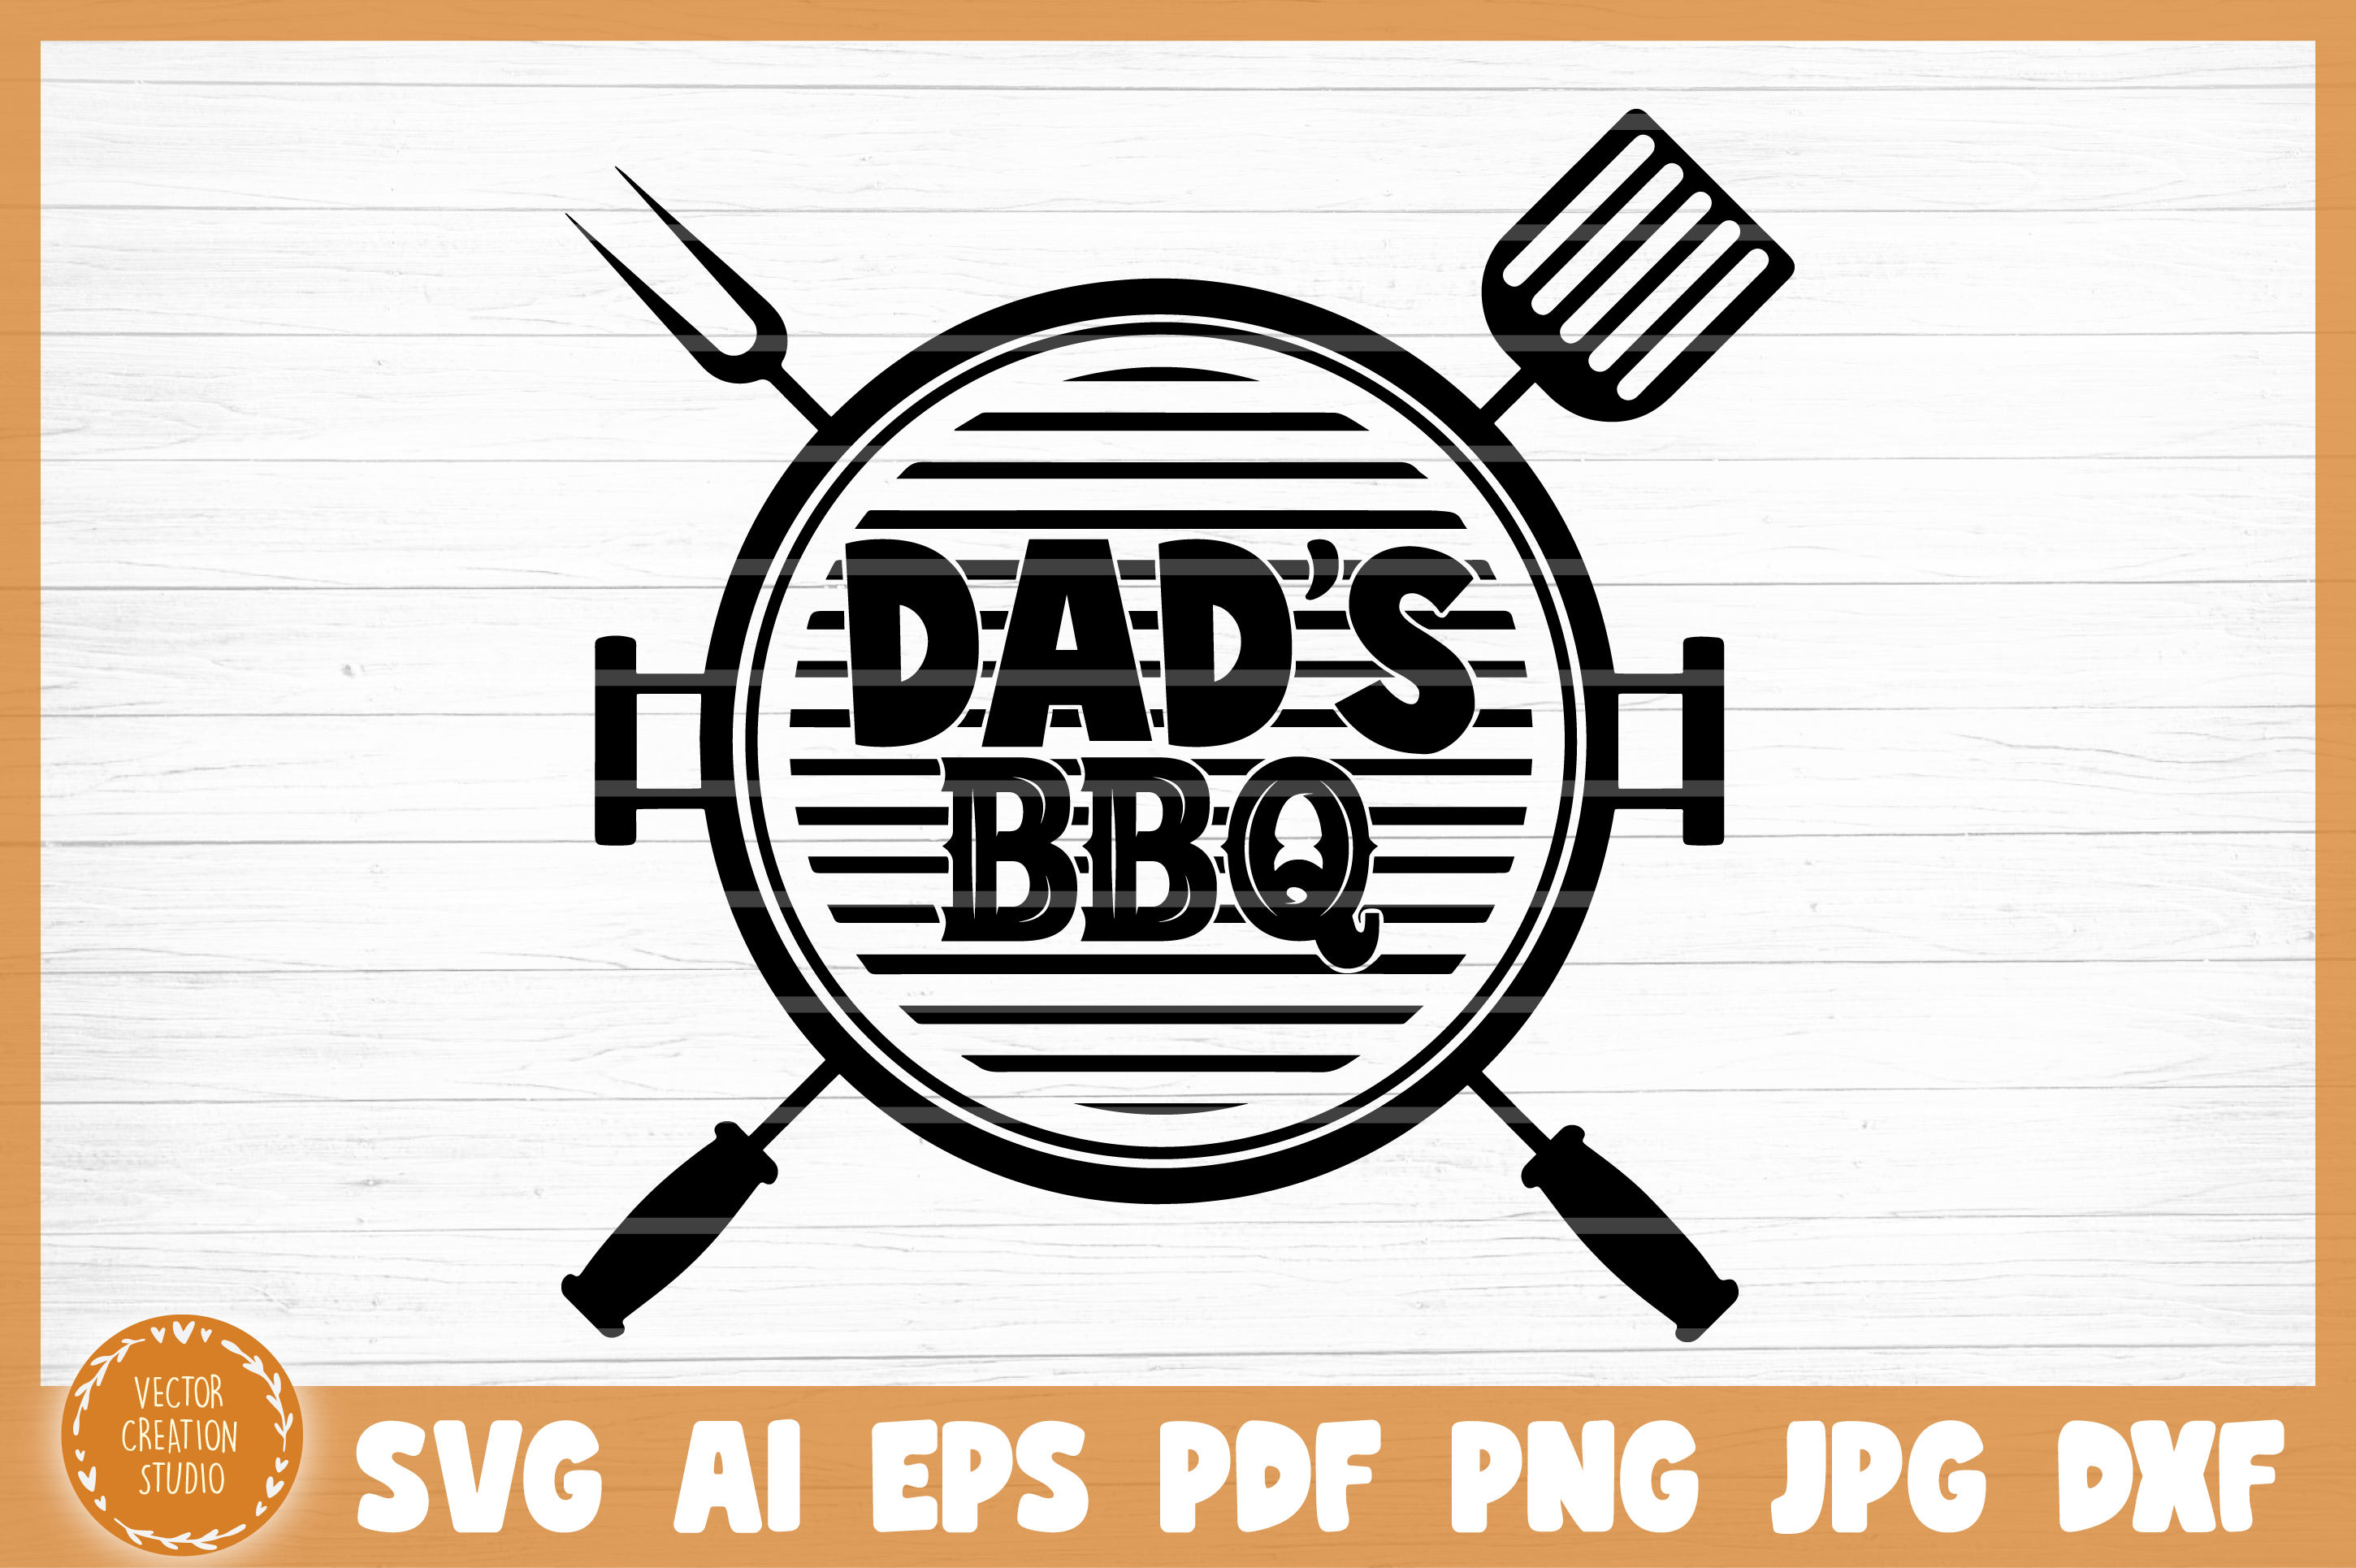 Dad S Bbq Grill Svg Cut File By Vectorcreationstudio Thehungryjpeg Com